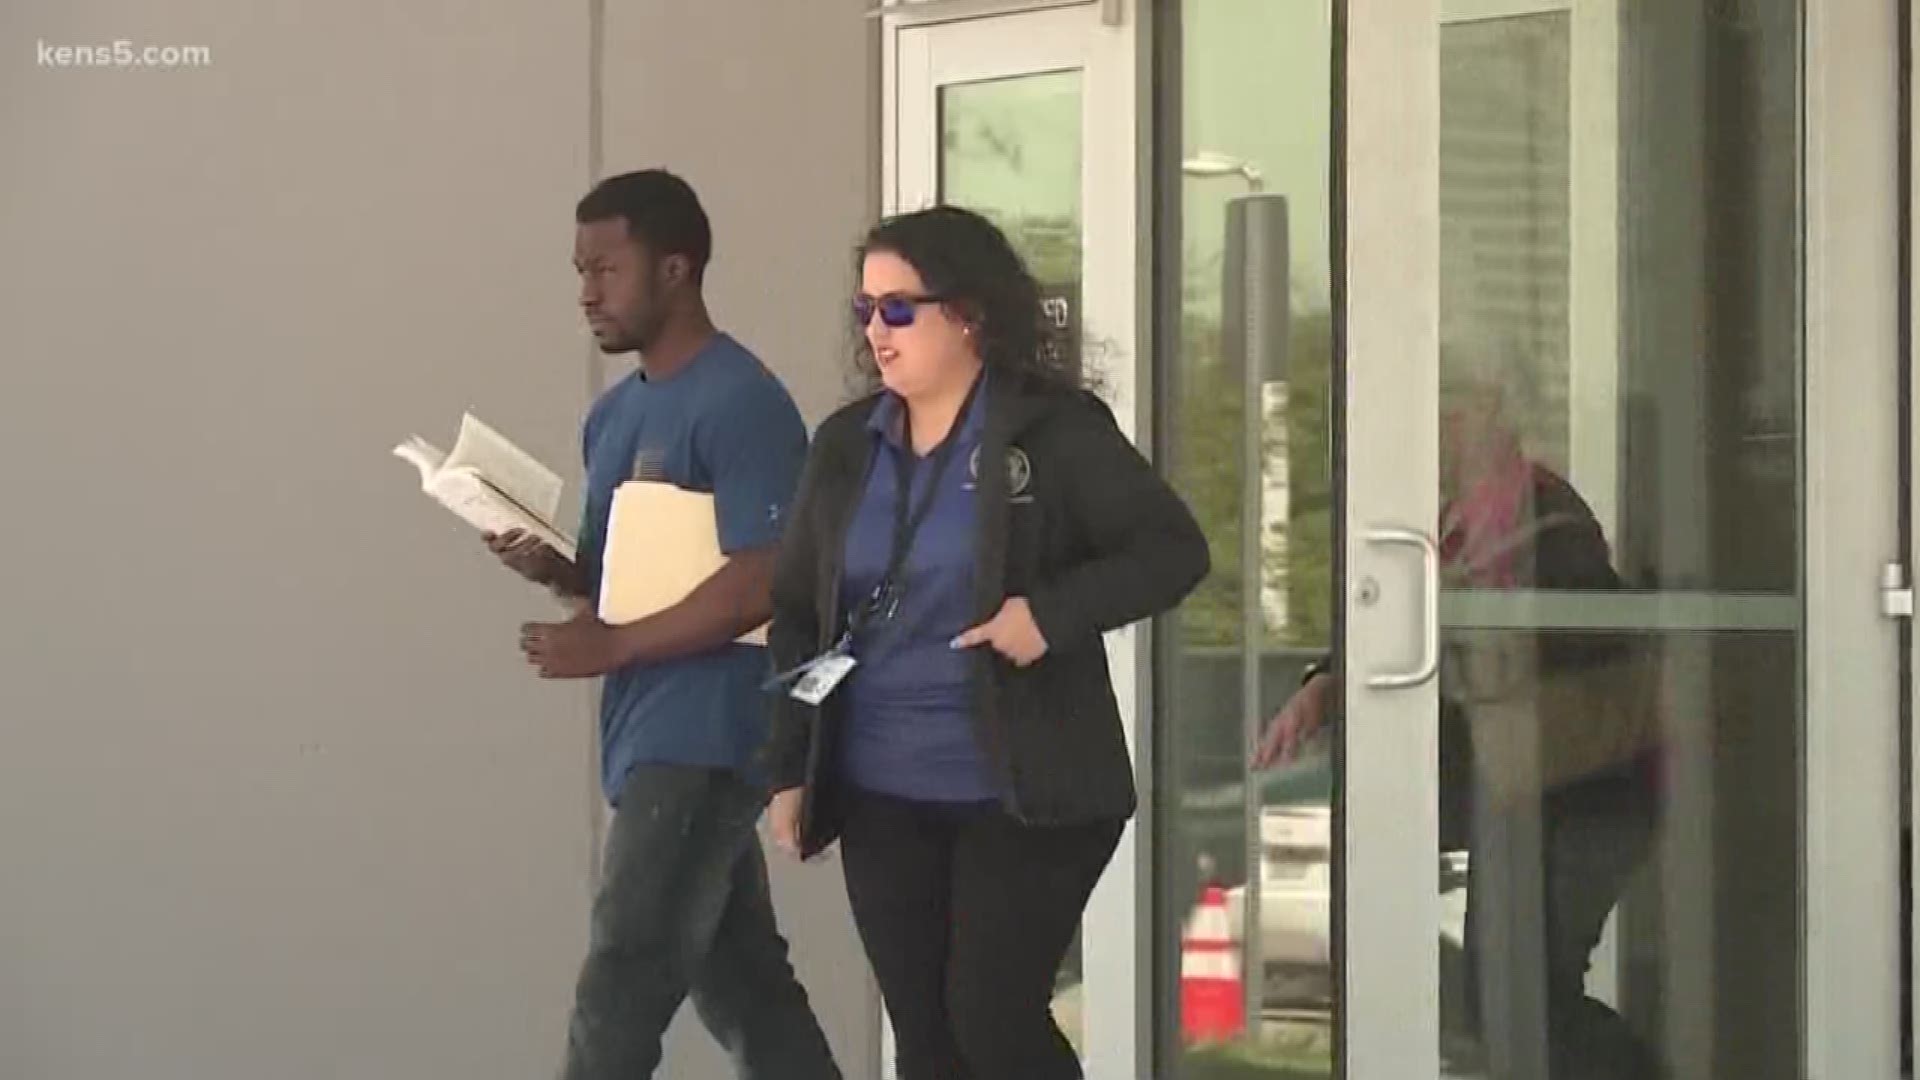 The husband of missing mom Andreen McDonald is out of jail. He's now on house arrest after posting bail. As the search continues for his missing wife, Eyewitness News reporter Erica Zucco is live at the Bexar County Jail where he was released this afternoon.